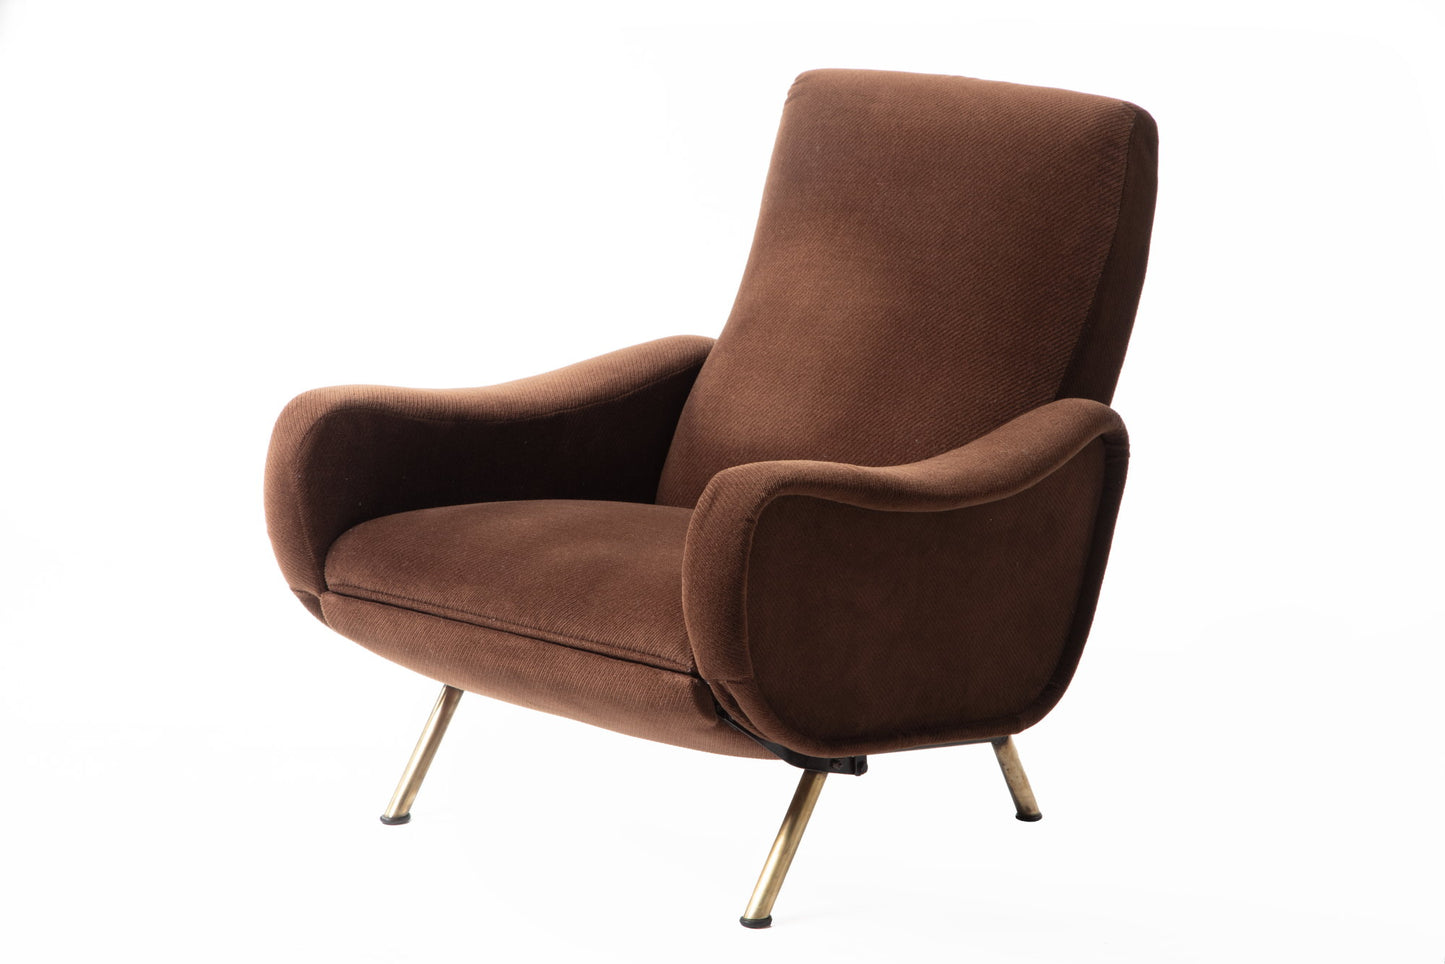 Lady armchair by Marco Zanuso for Arflex from the 50s